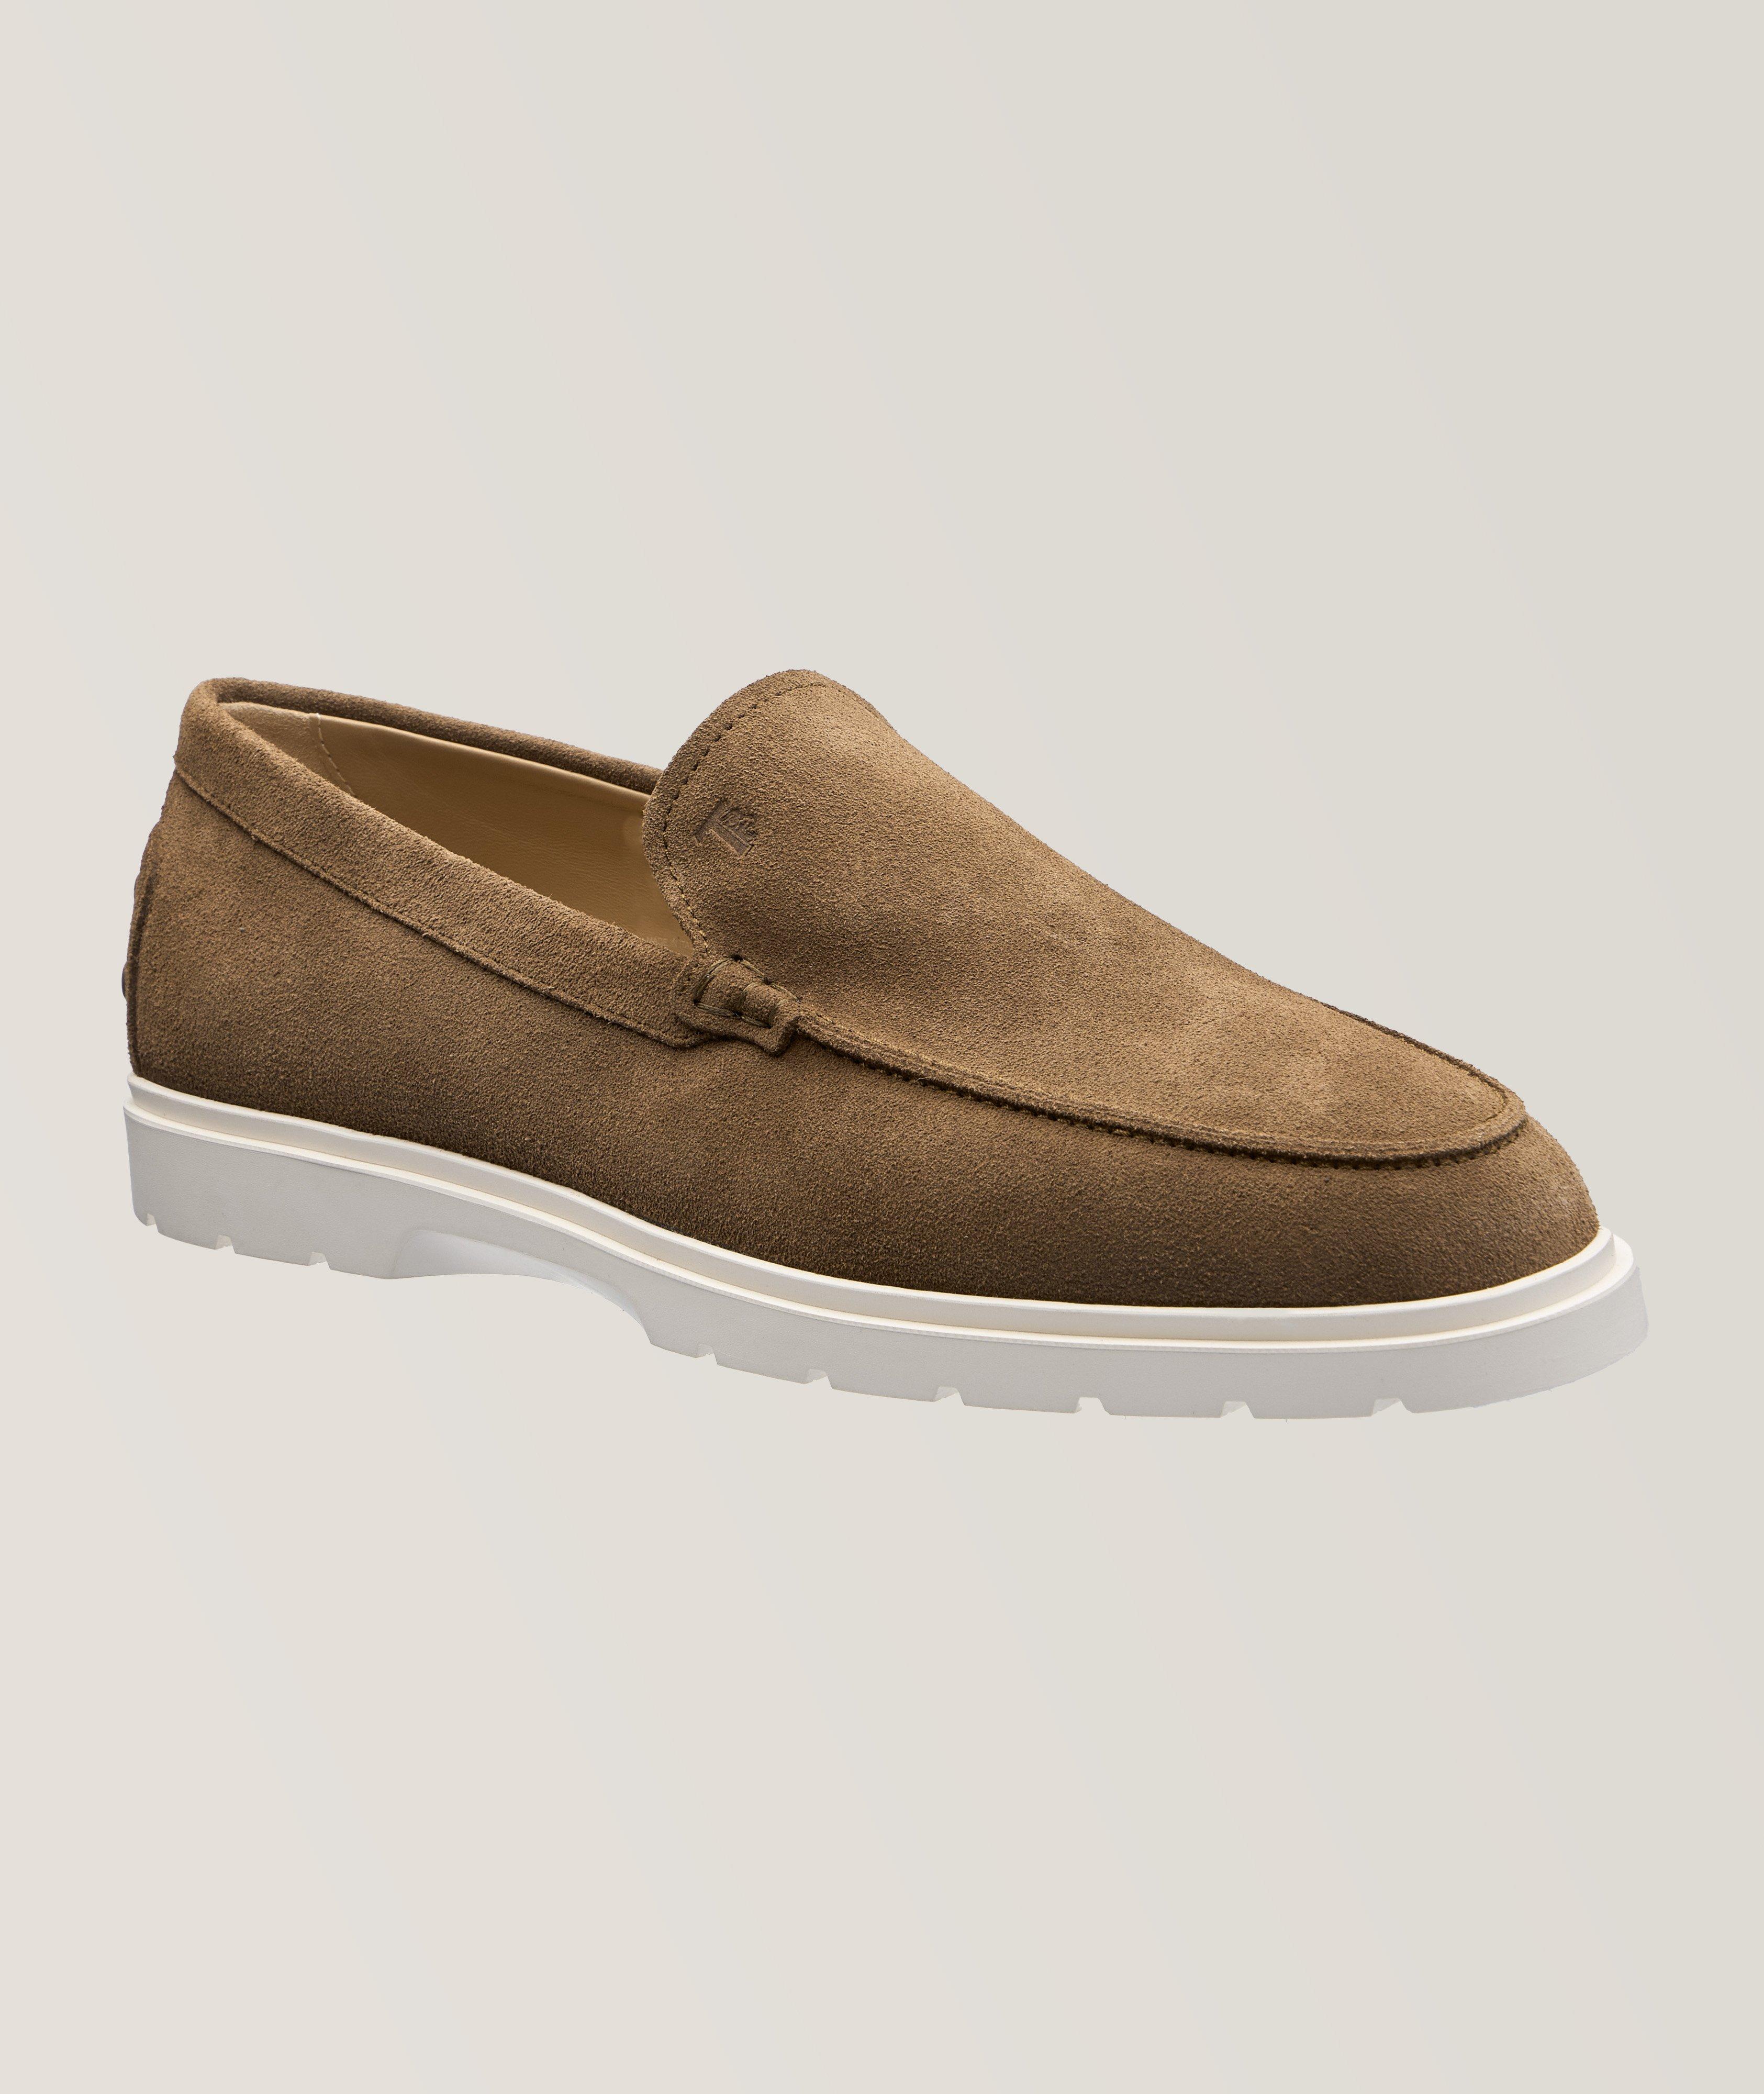 Suede Slipper Loafers  image 0